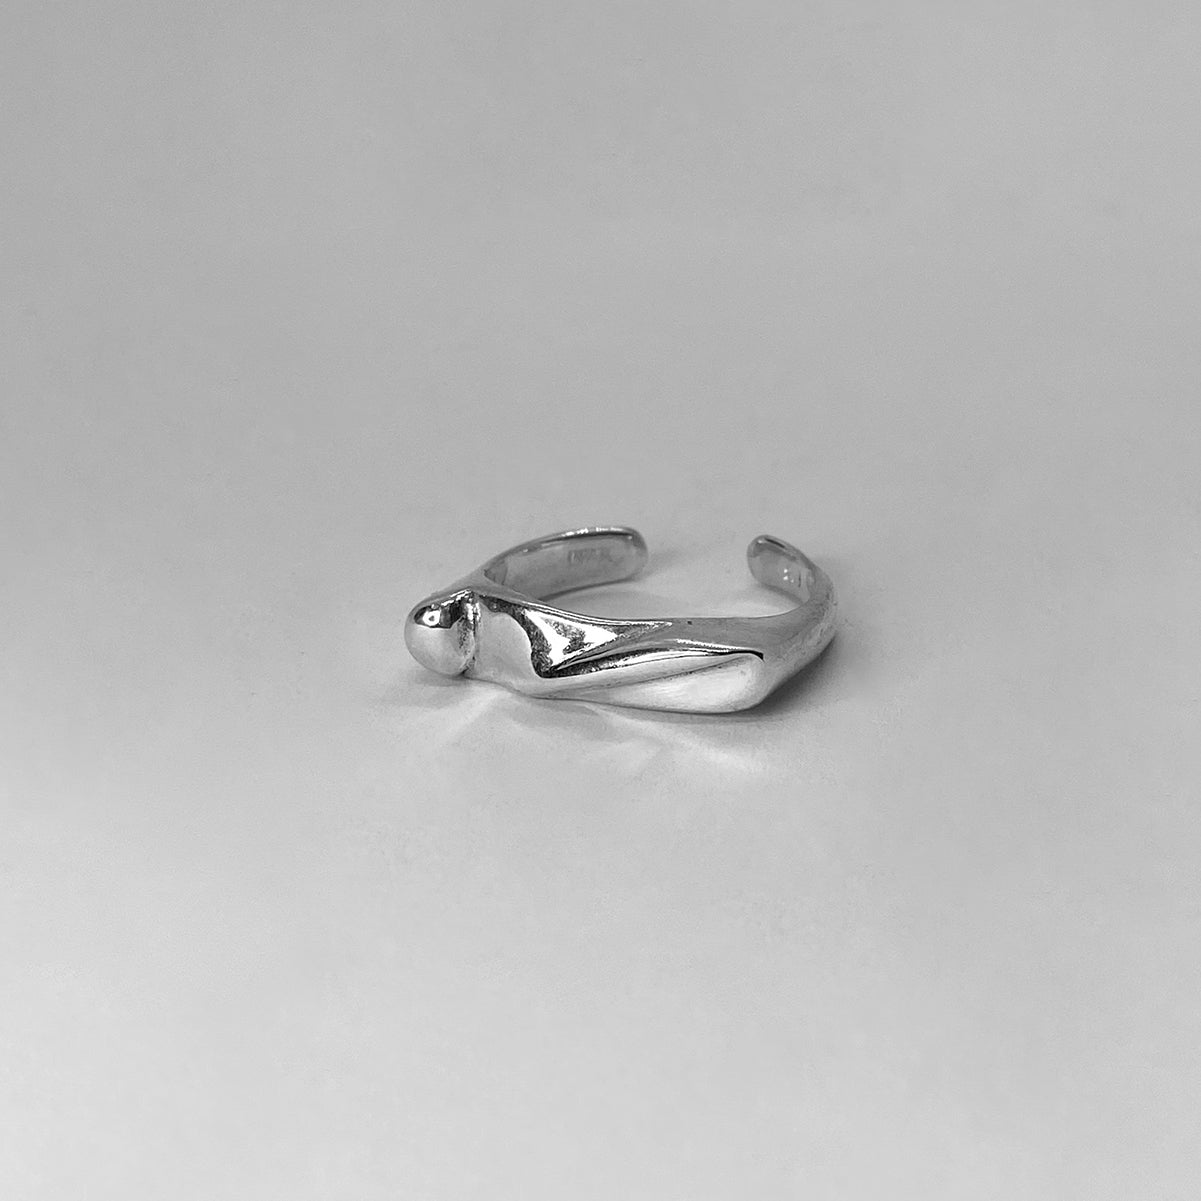 The Shai ring is a handmade piece crafted from 925 sterling silver. It is delicate and has a square shape with different lines on its surface. It has a shiny finish